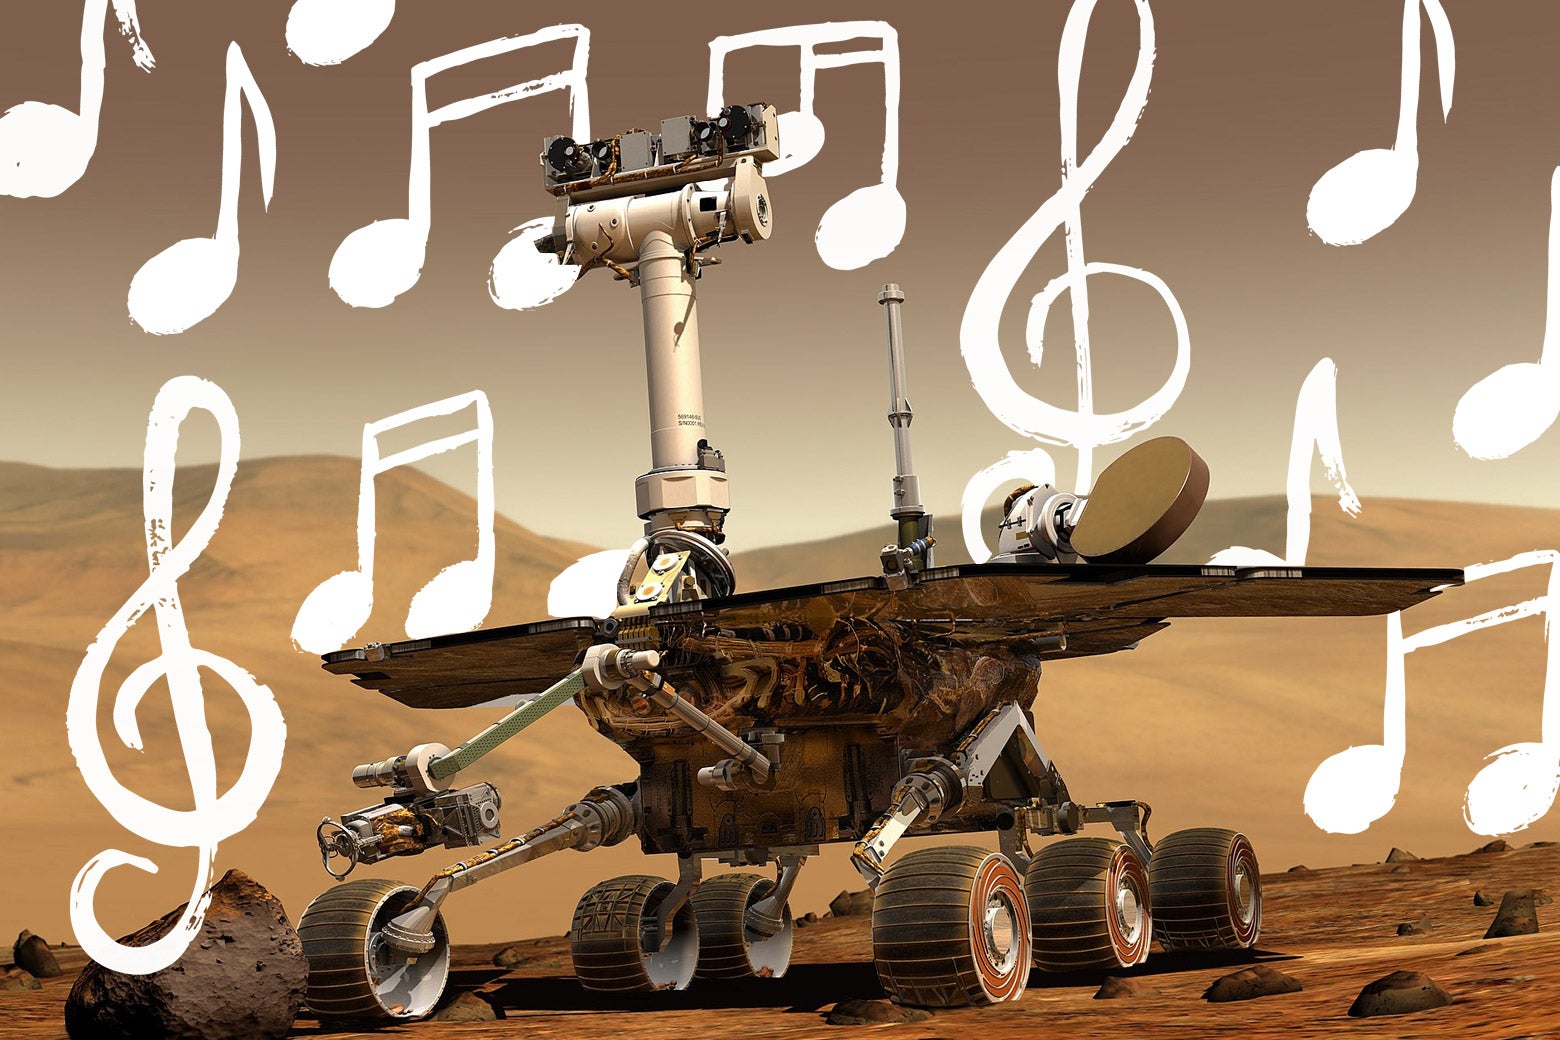 The Mars rover surrounded by musical notes.